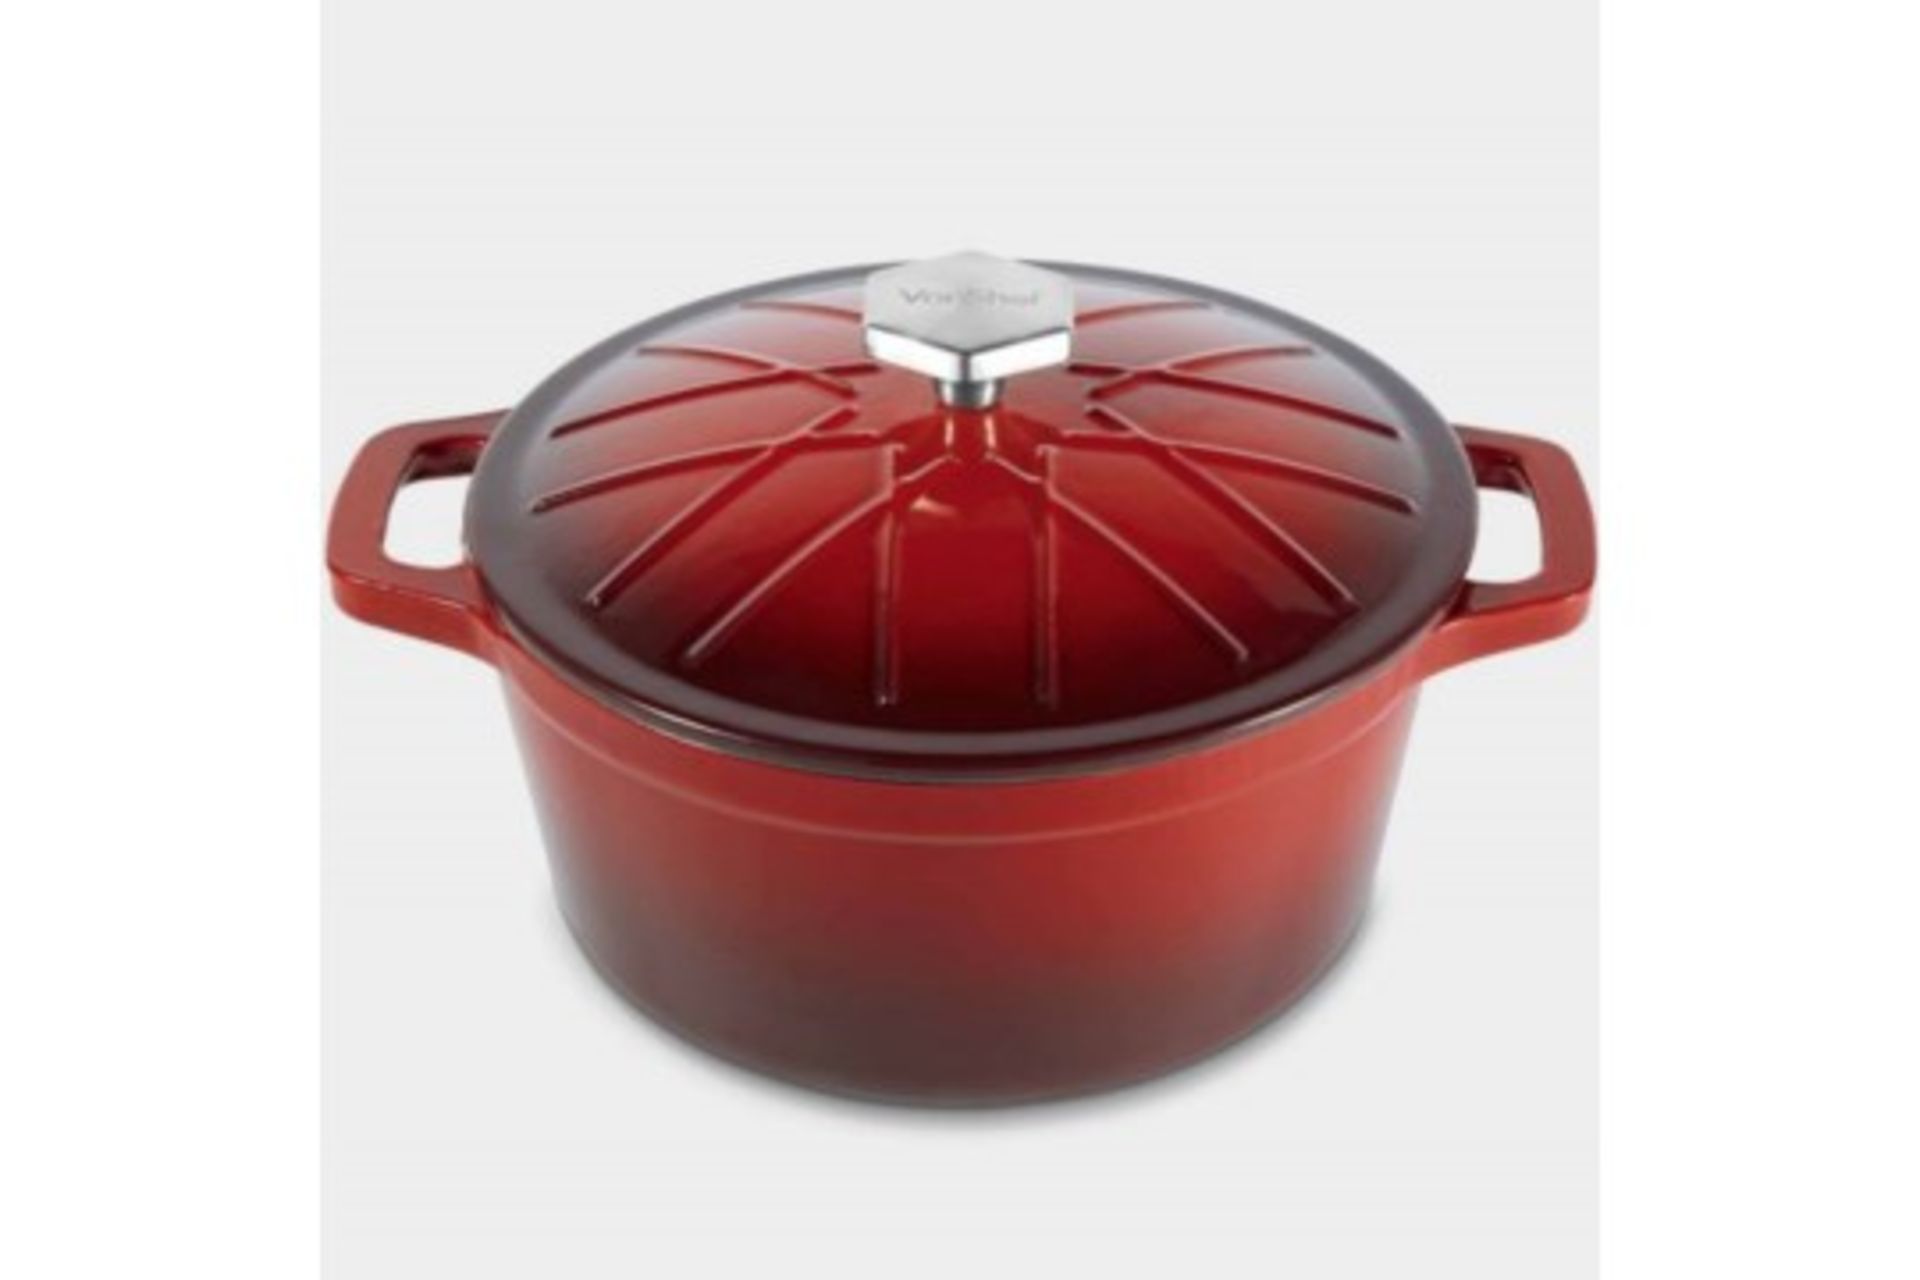 V149) 3.8L Cast Iron Casserole Dish Large 3.8L capacity dish - perfect for casseroles, soups, r... - Image 2 of 3